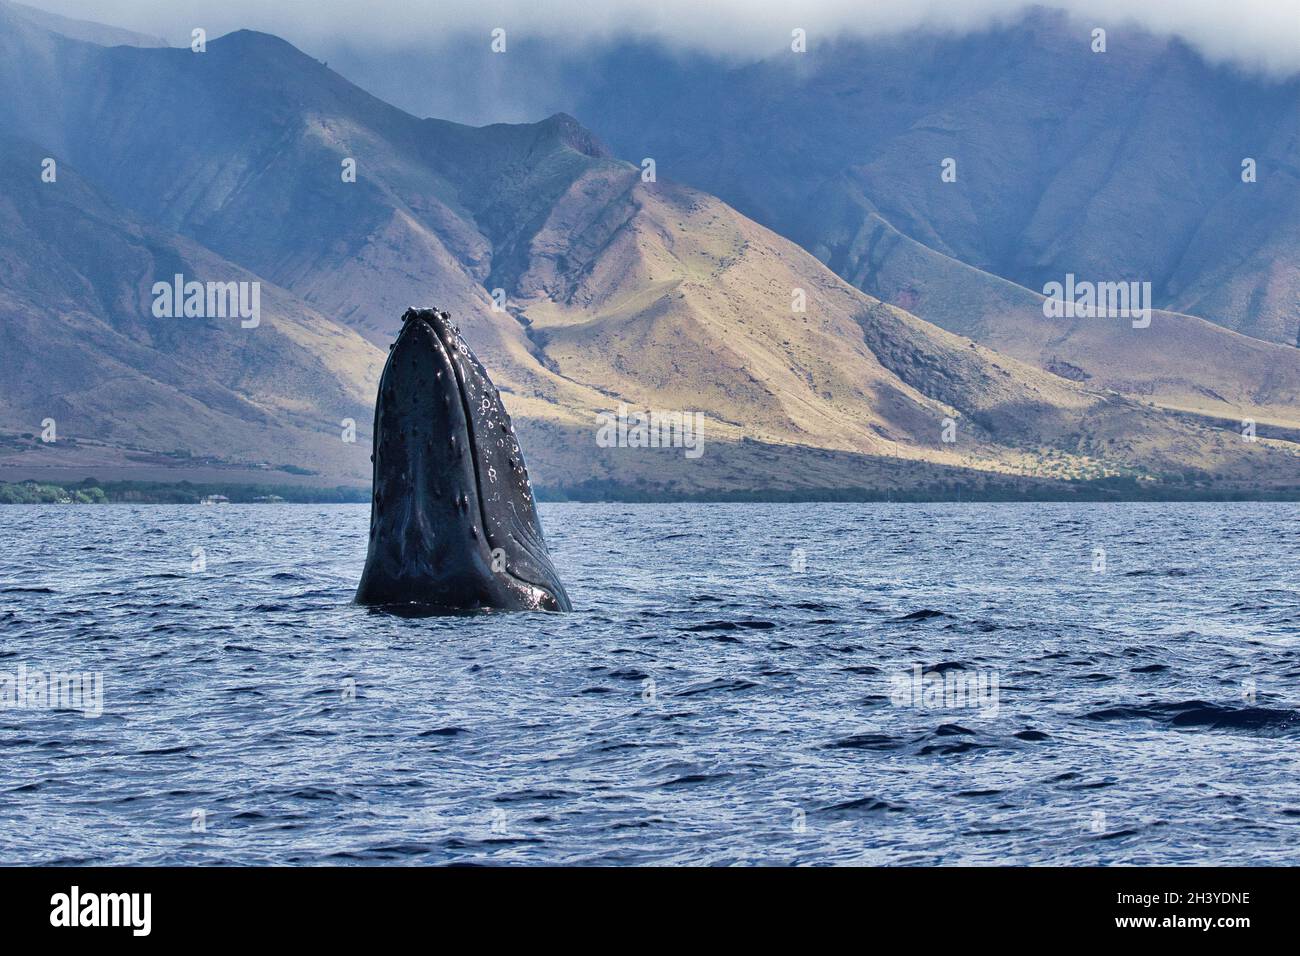 Curious humpback whale playing peek-a-boo with an unseen whale boat. Stock Photo